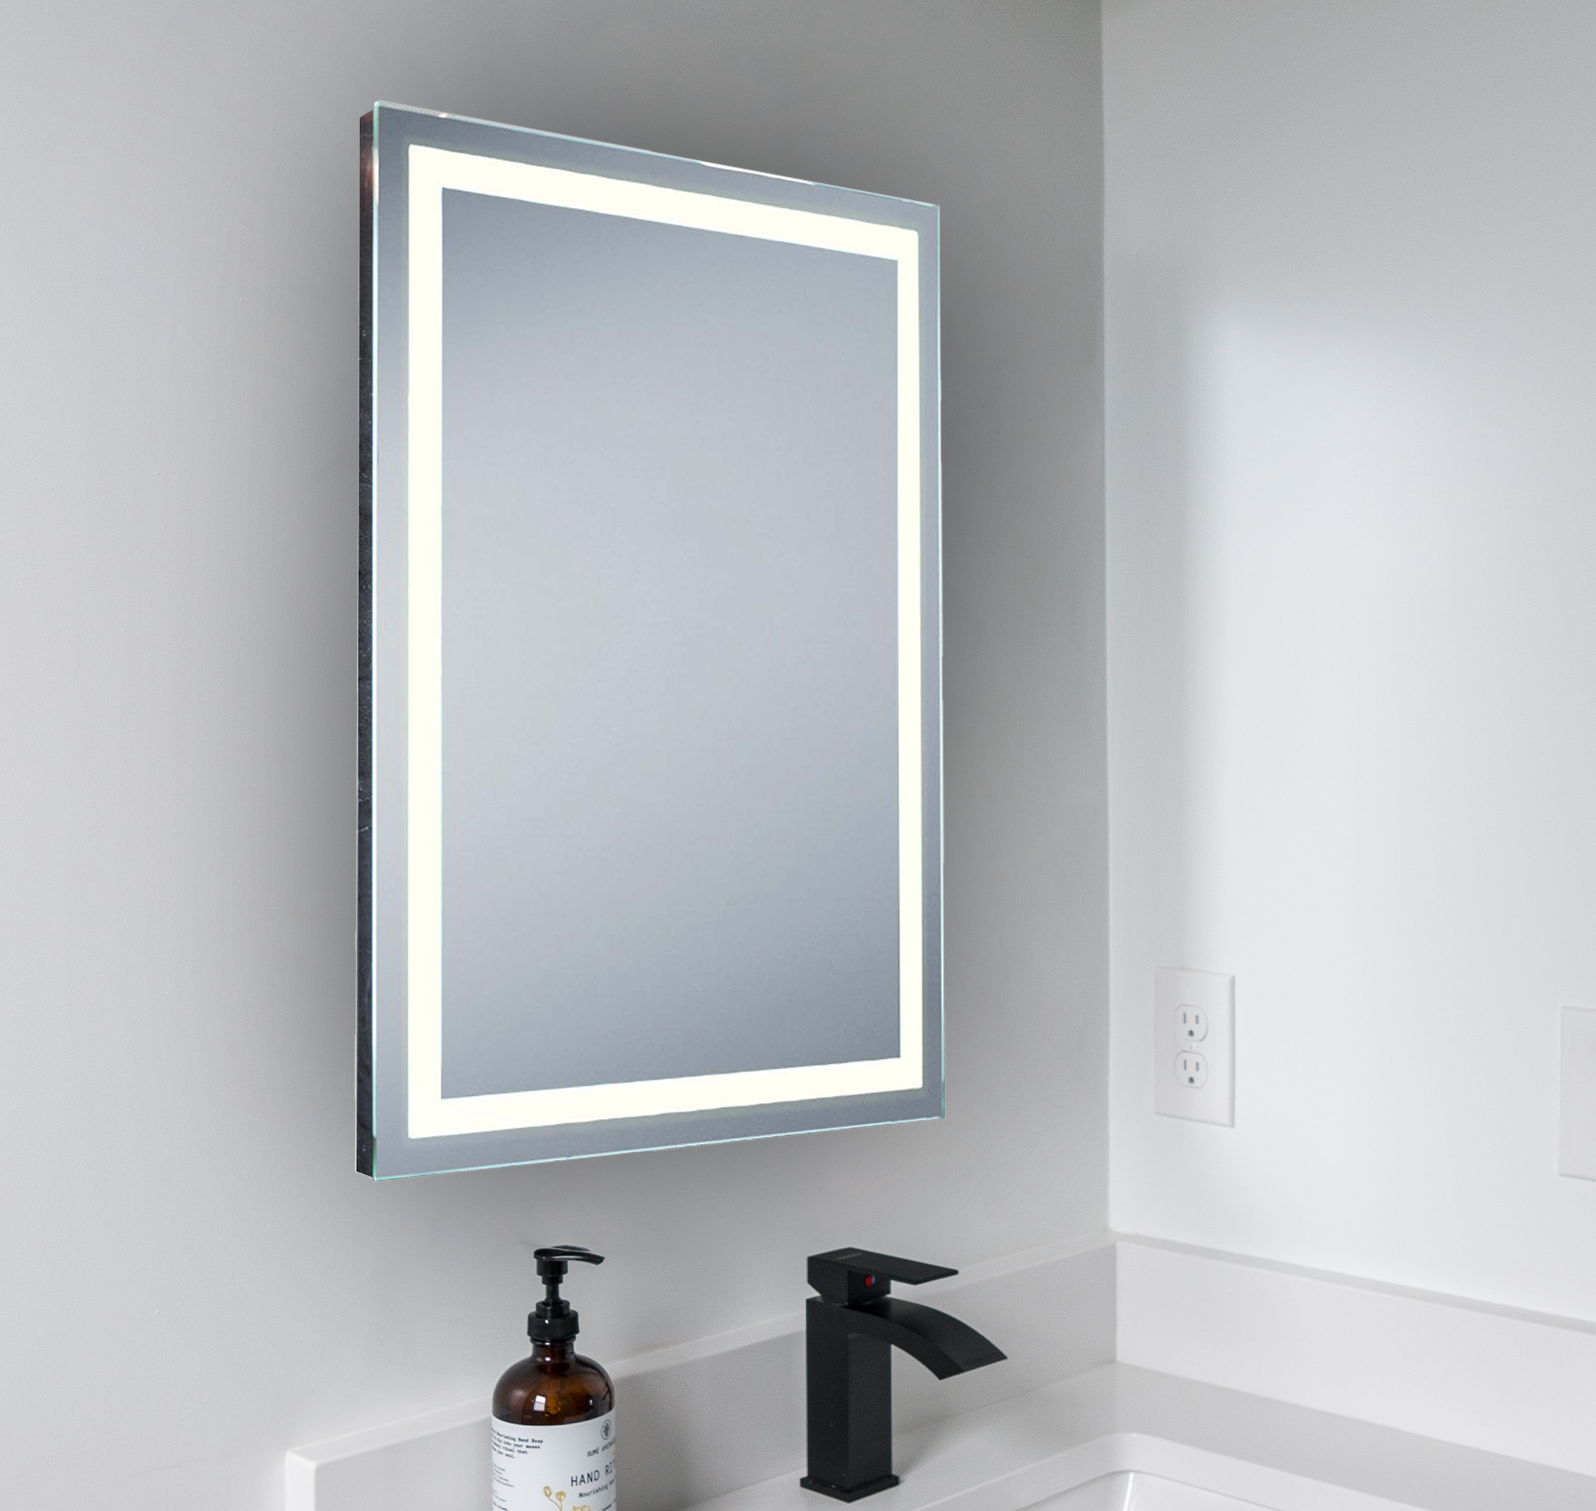 Small LED Bathroom Mirror Light, Demister Pad and Sensor Switch Included, 26 Watts 2000 Lumens, IP44 Natural White 4000K, RRP: £200 - 60% OFF